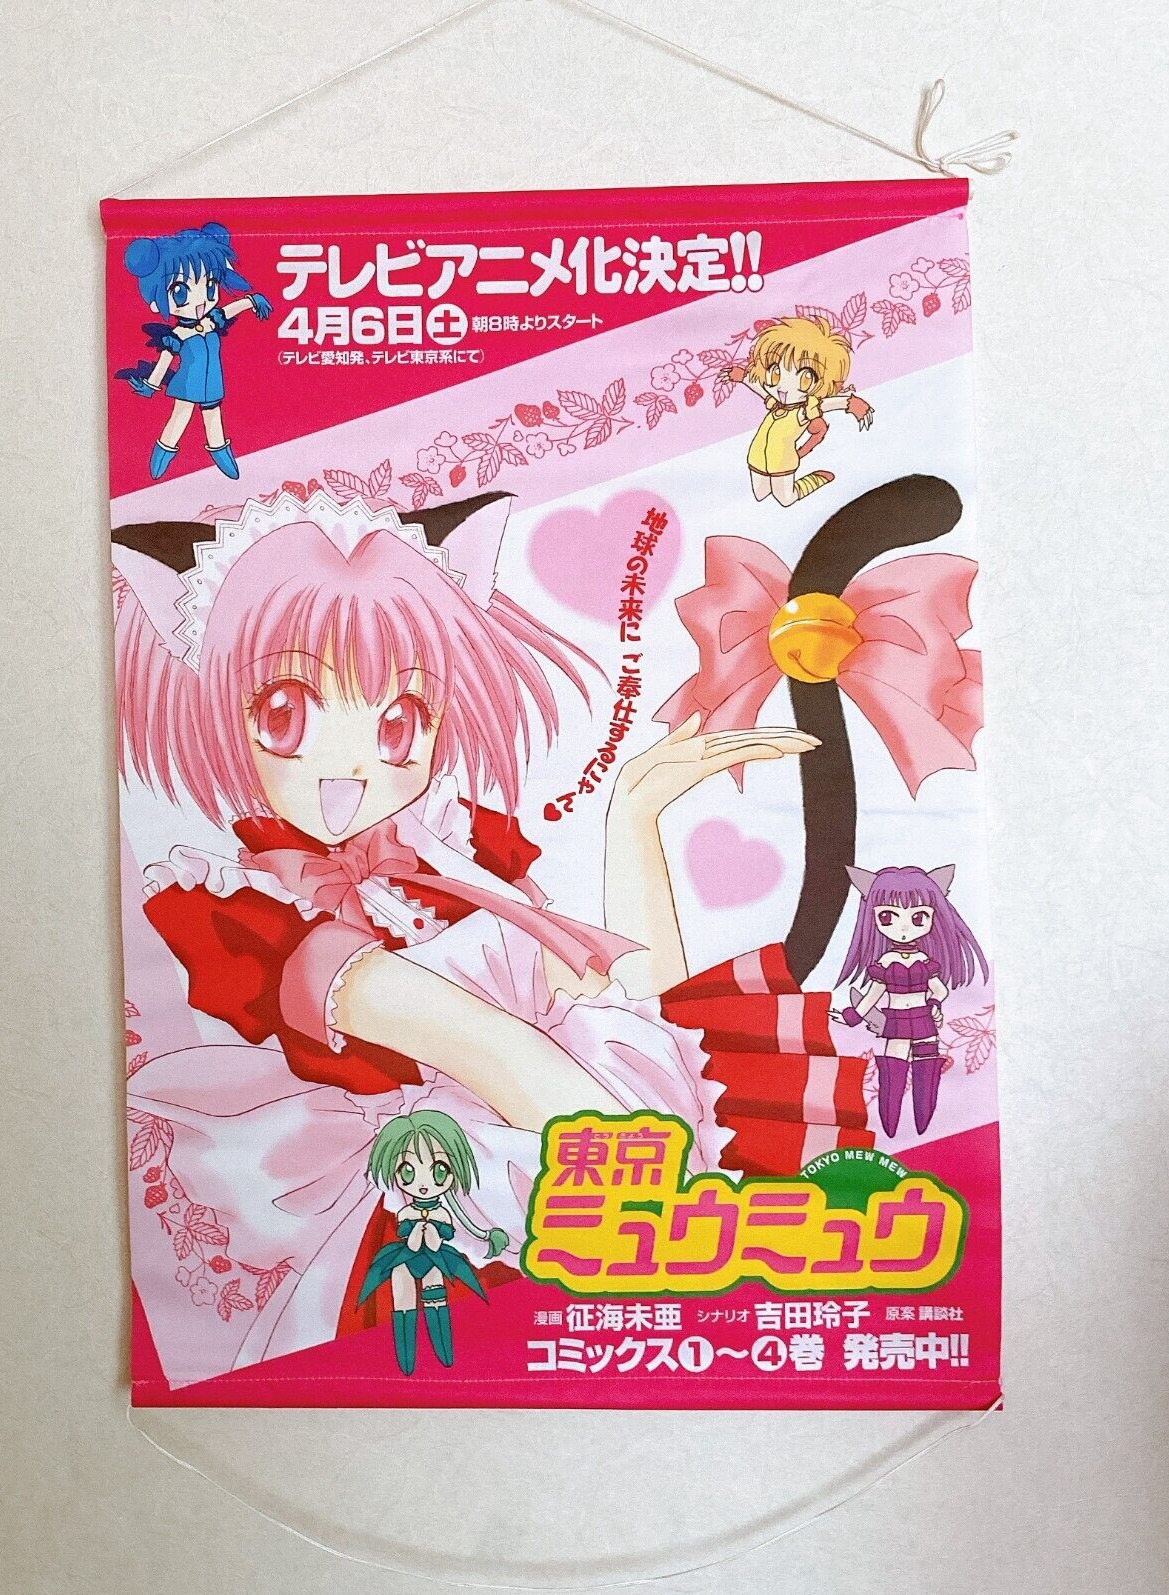 Tokyo Mew Mew Tapestry for promotion Wall scroll anime manga 58×42cm